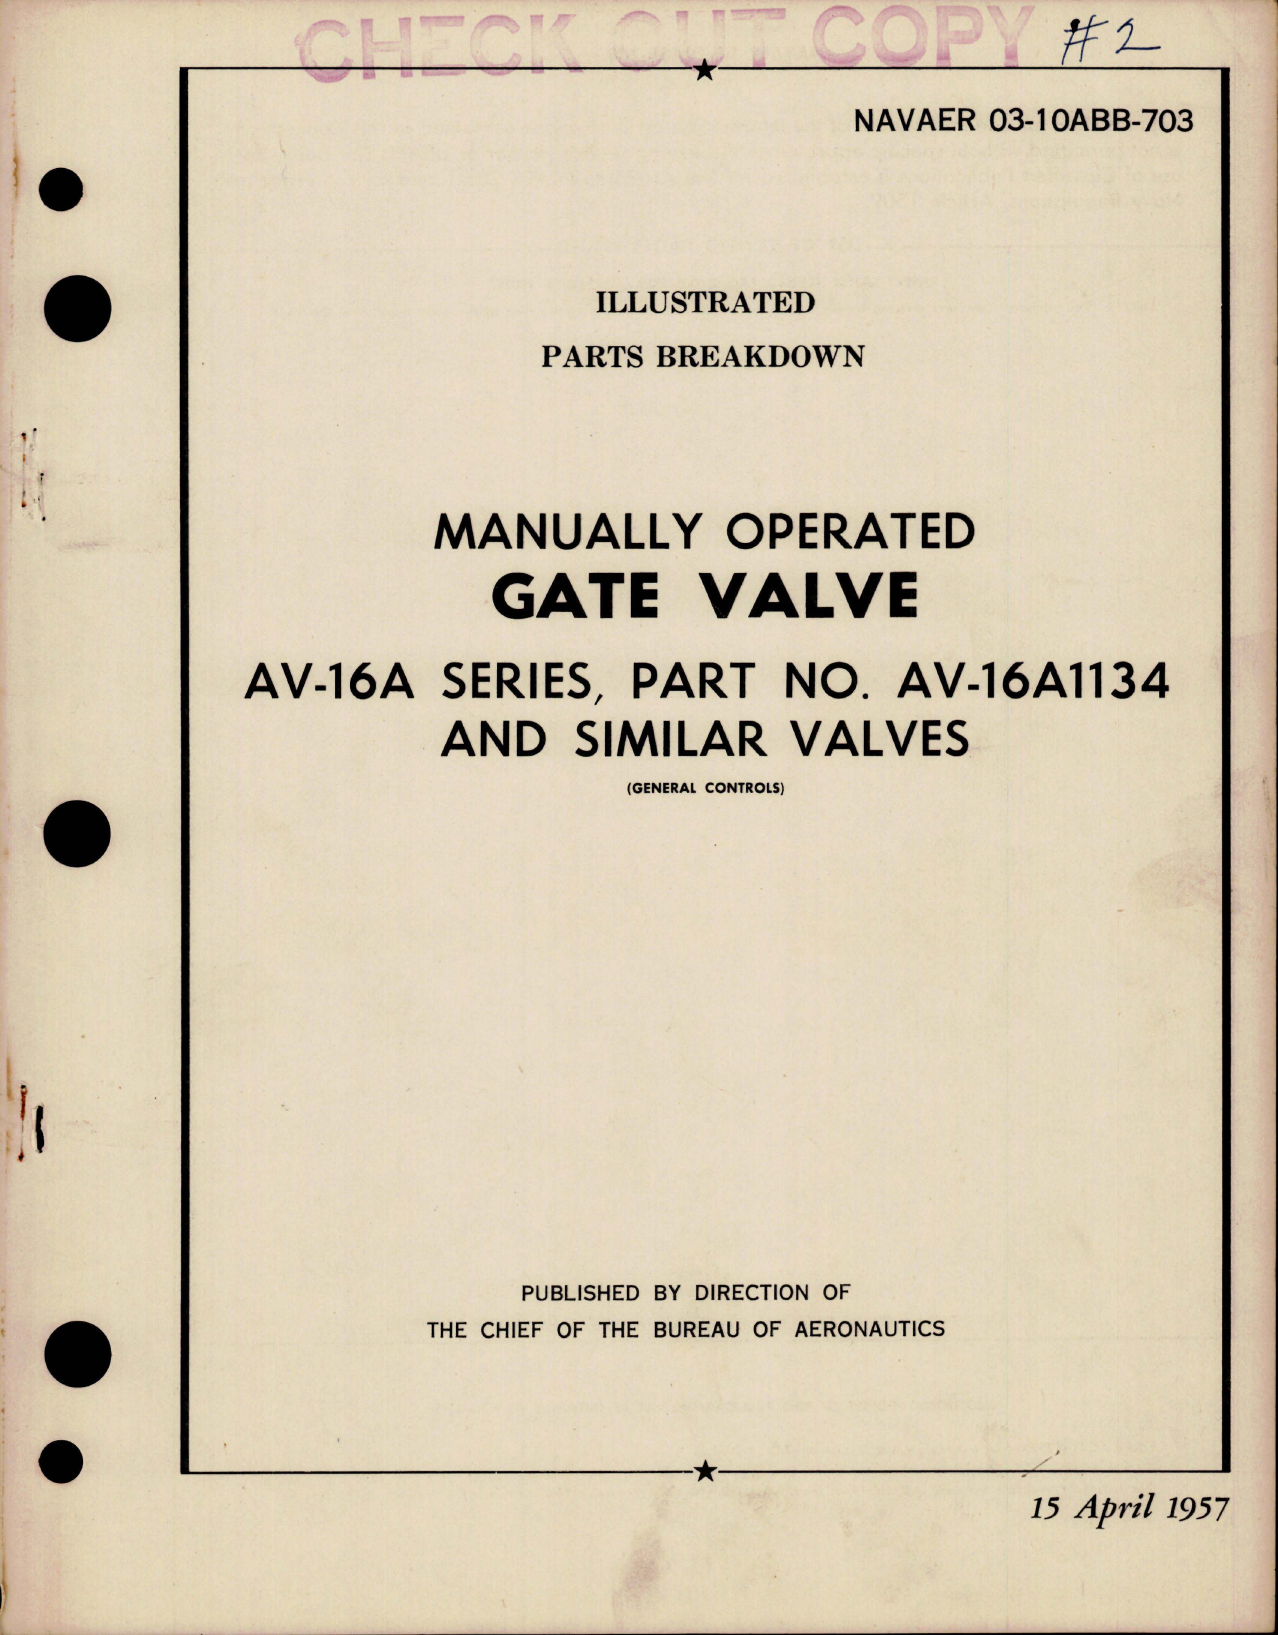 Sample page 1 from AirCorps Library document: Parts Breakdown for Manually Operated Gate Valve - AV-16A Series - Part AV-16A1134 